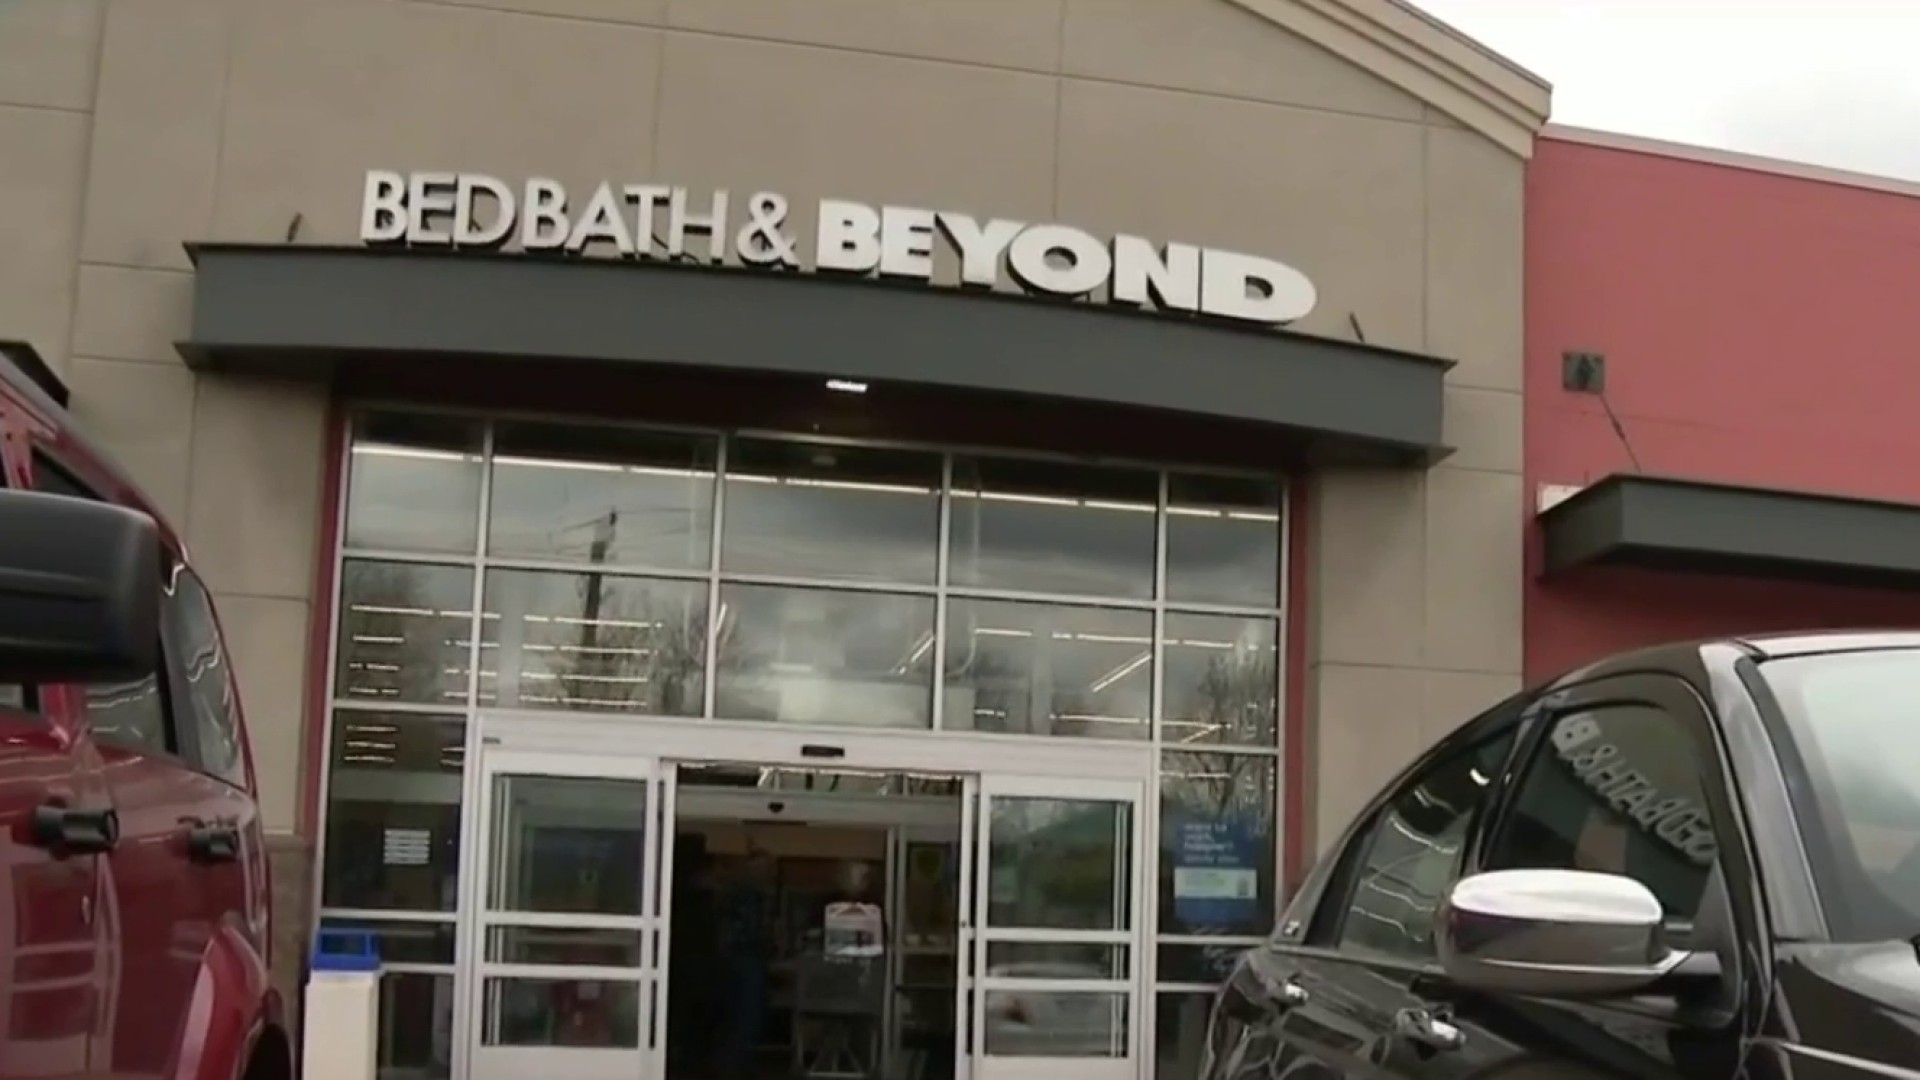 Save Up to 50% During Bed Bath & Beyond's Winter Clearance Sale